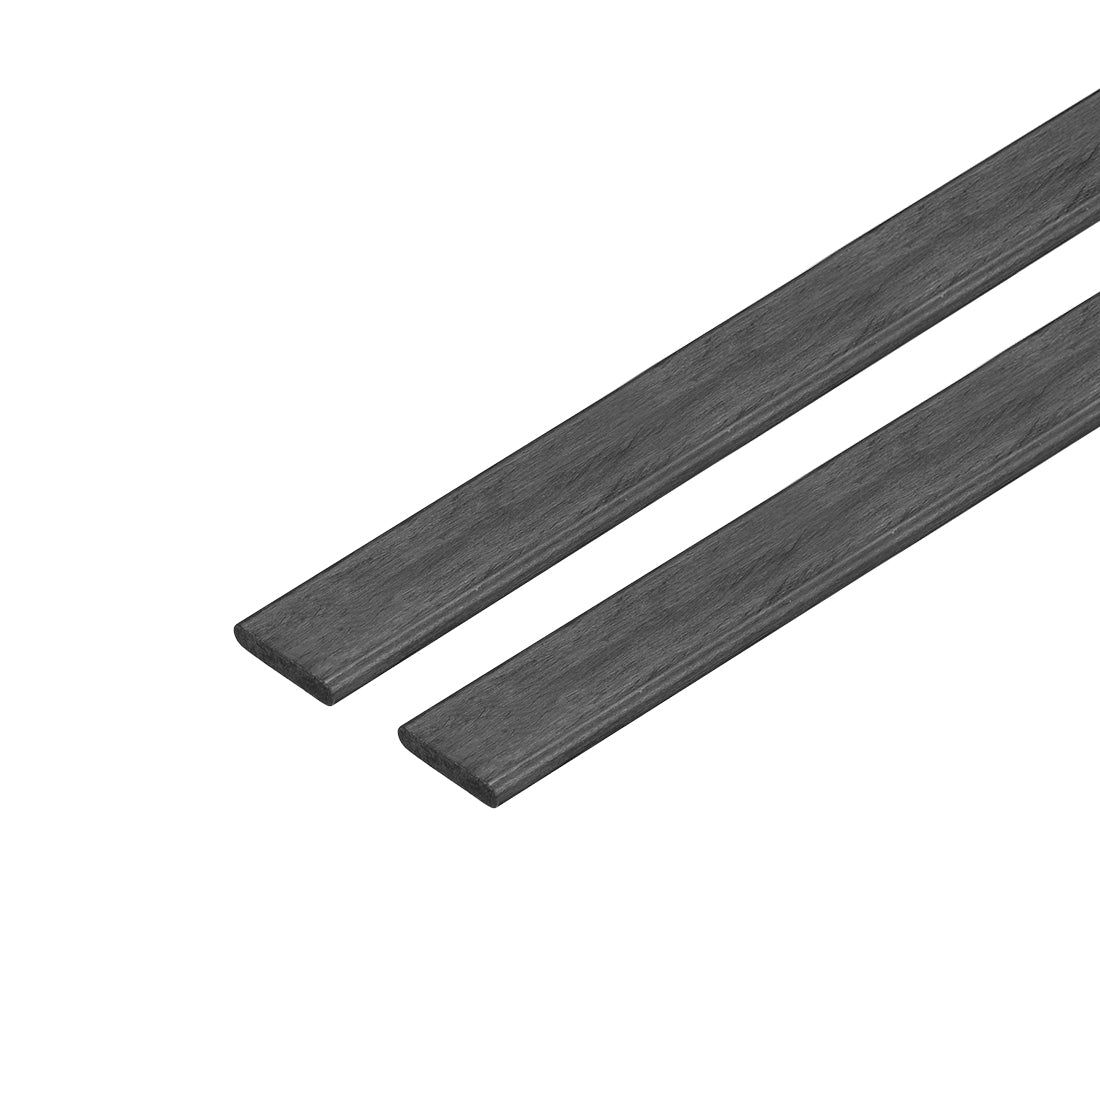 uxcell Uxcell Carbon Fiber Strip Bars 2x10mm 200mm Length Pultruded Carbon Fiber Strips for Kites, RC Airplane 2 Pcs